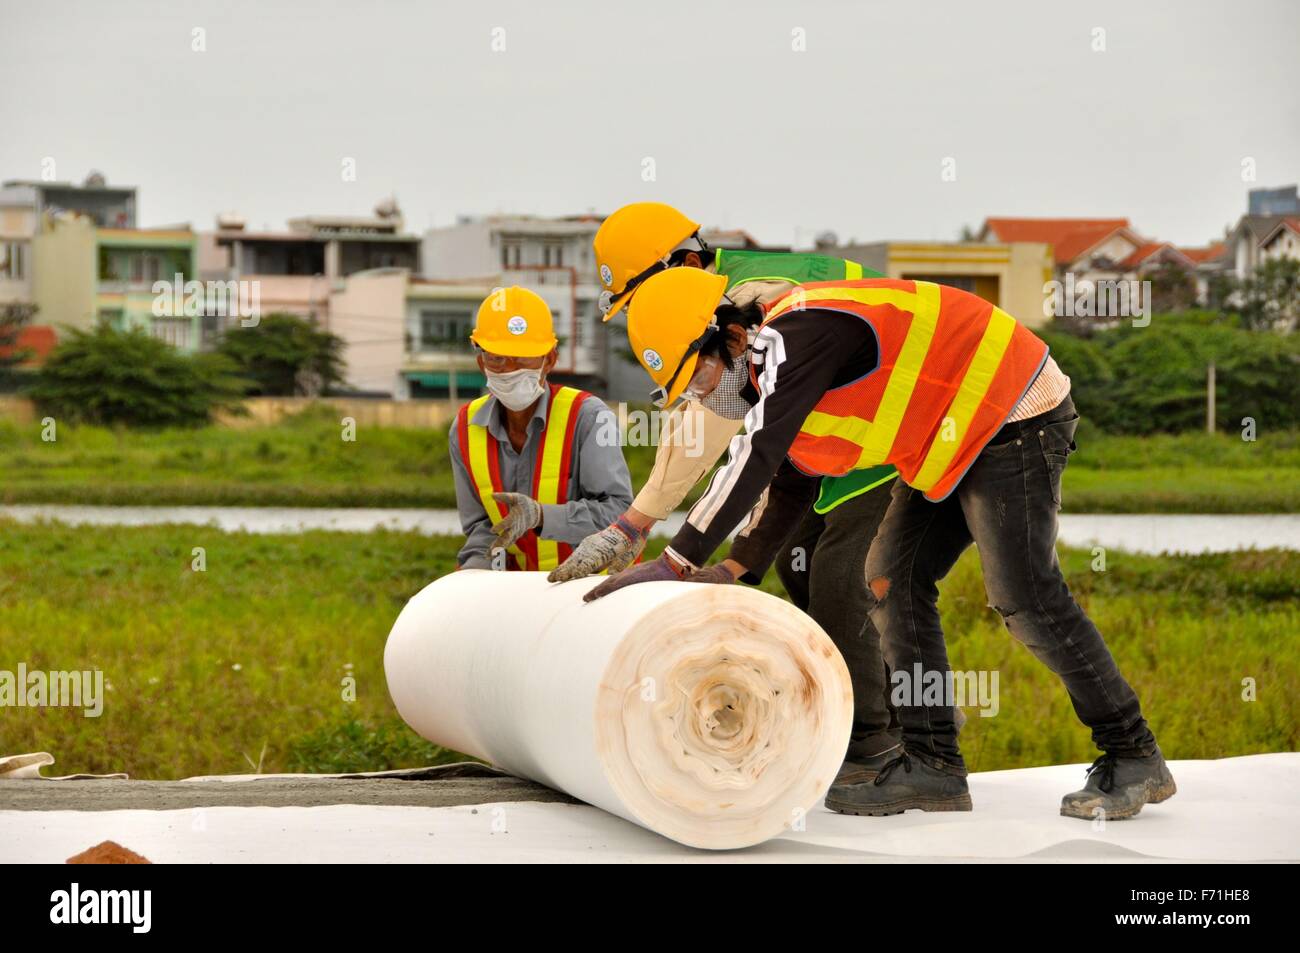 Vietnamese construction workers apply plastic sheeting during Dioxin remediation efforts of contaminated land around the airport January 22, 2013 in Da Nang City, Vietnam. Dioxin is an extremely hazardous chemical that was used in Agent Orange by the U.S. during the Vietnam war. Stock Photo